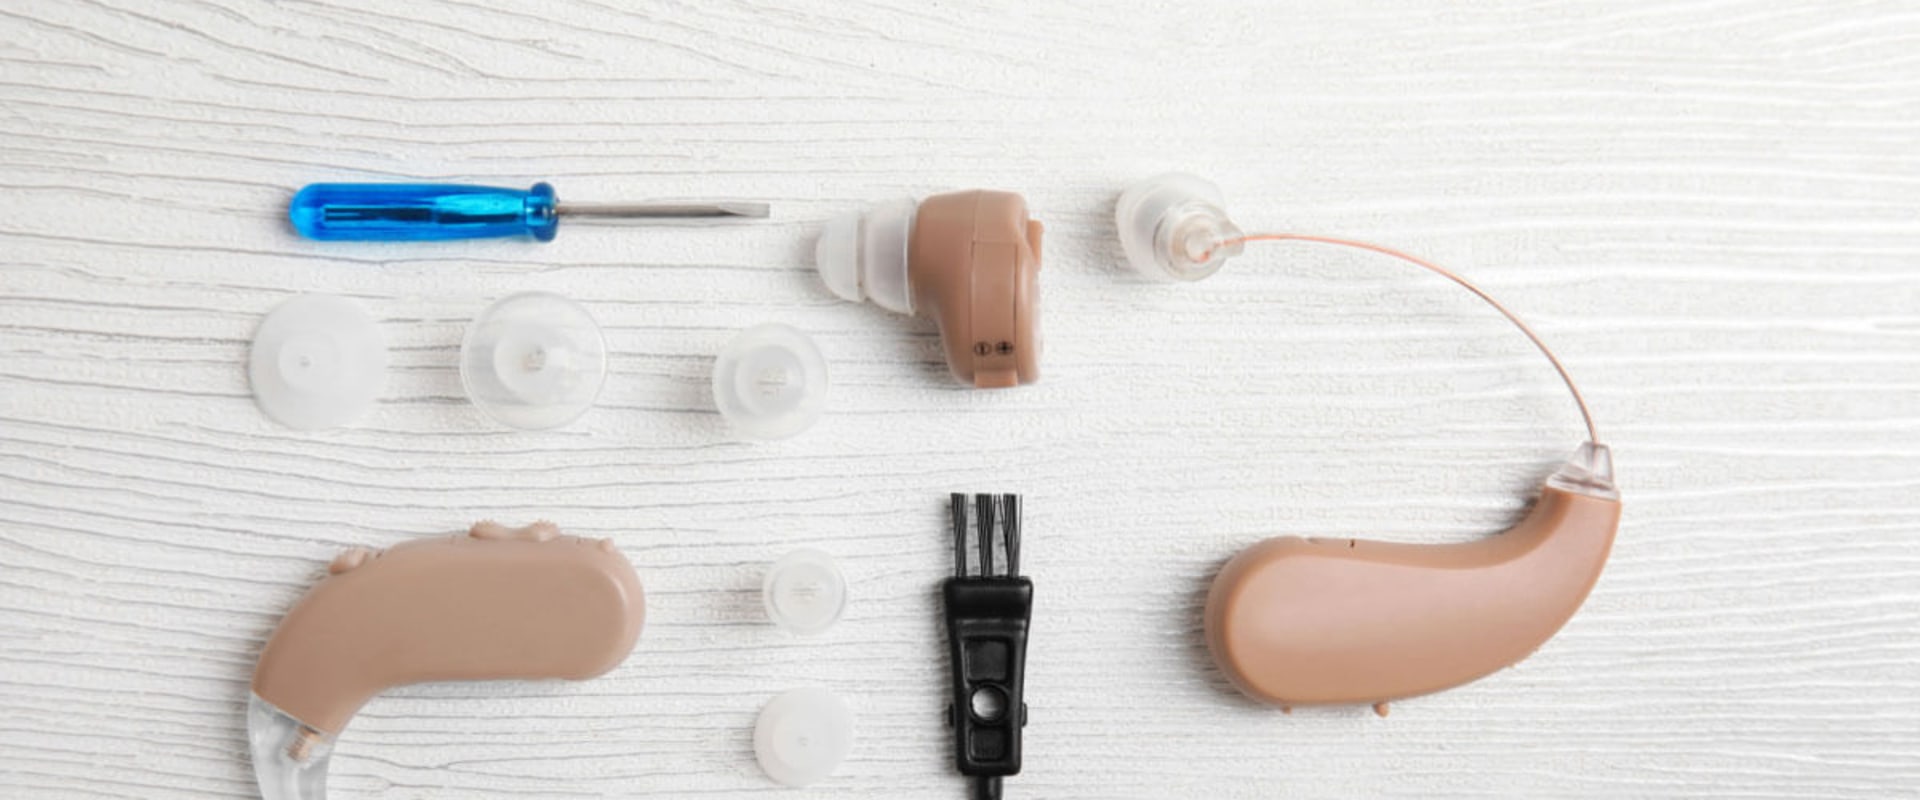 Are hearing aids durable medical equipment?